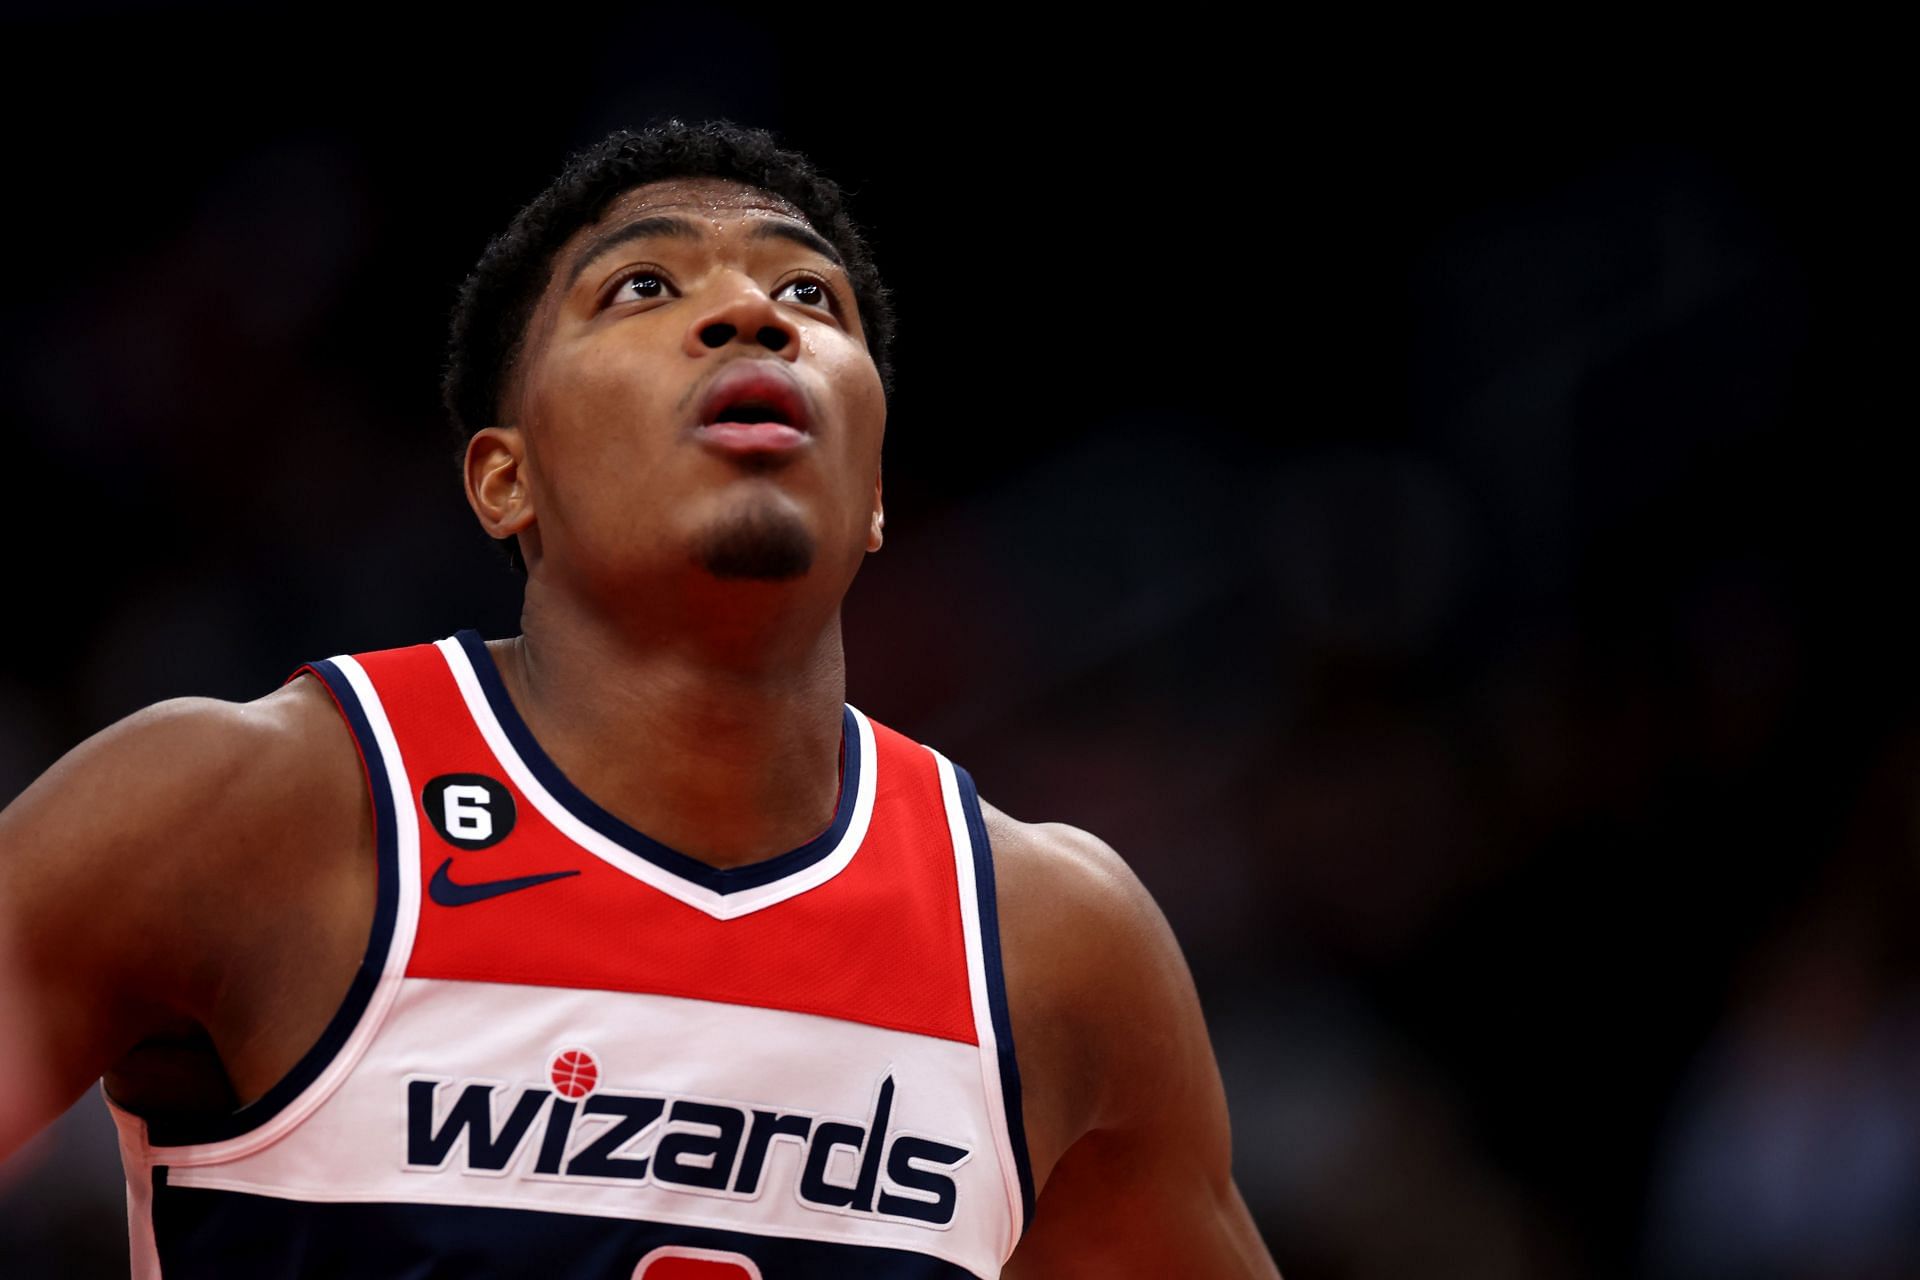 Rui Hachimura Parents - Where Are They Now?